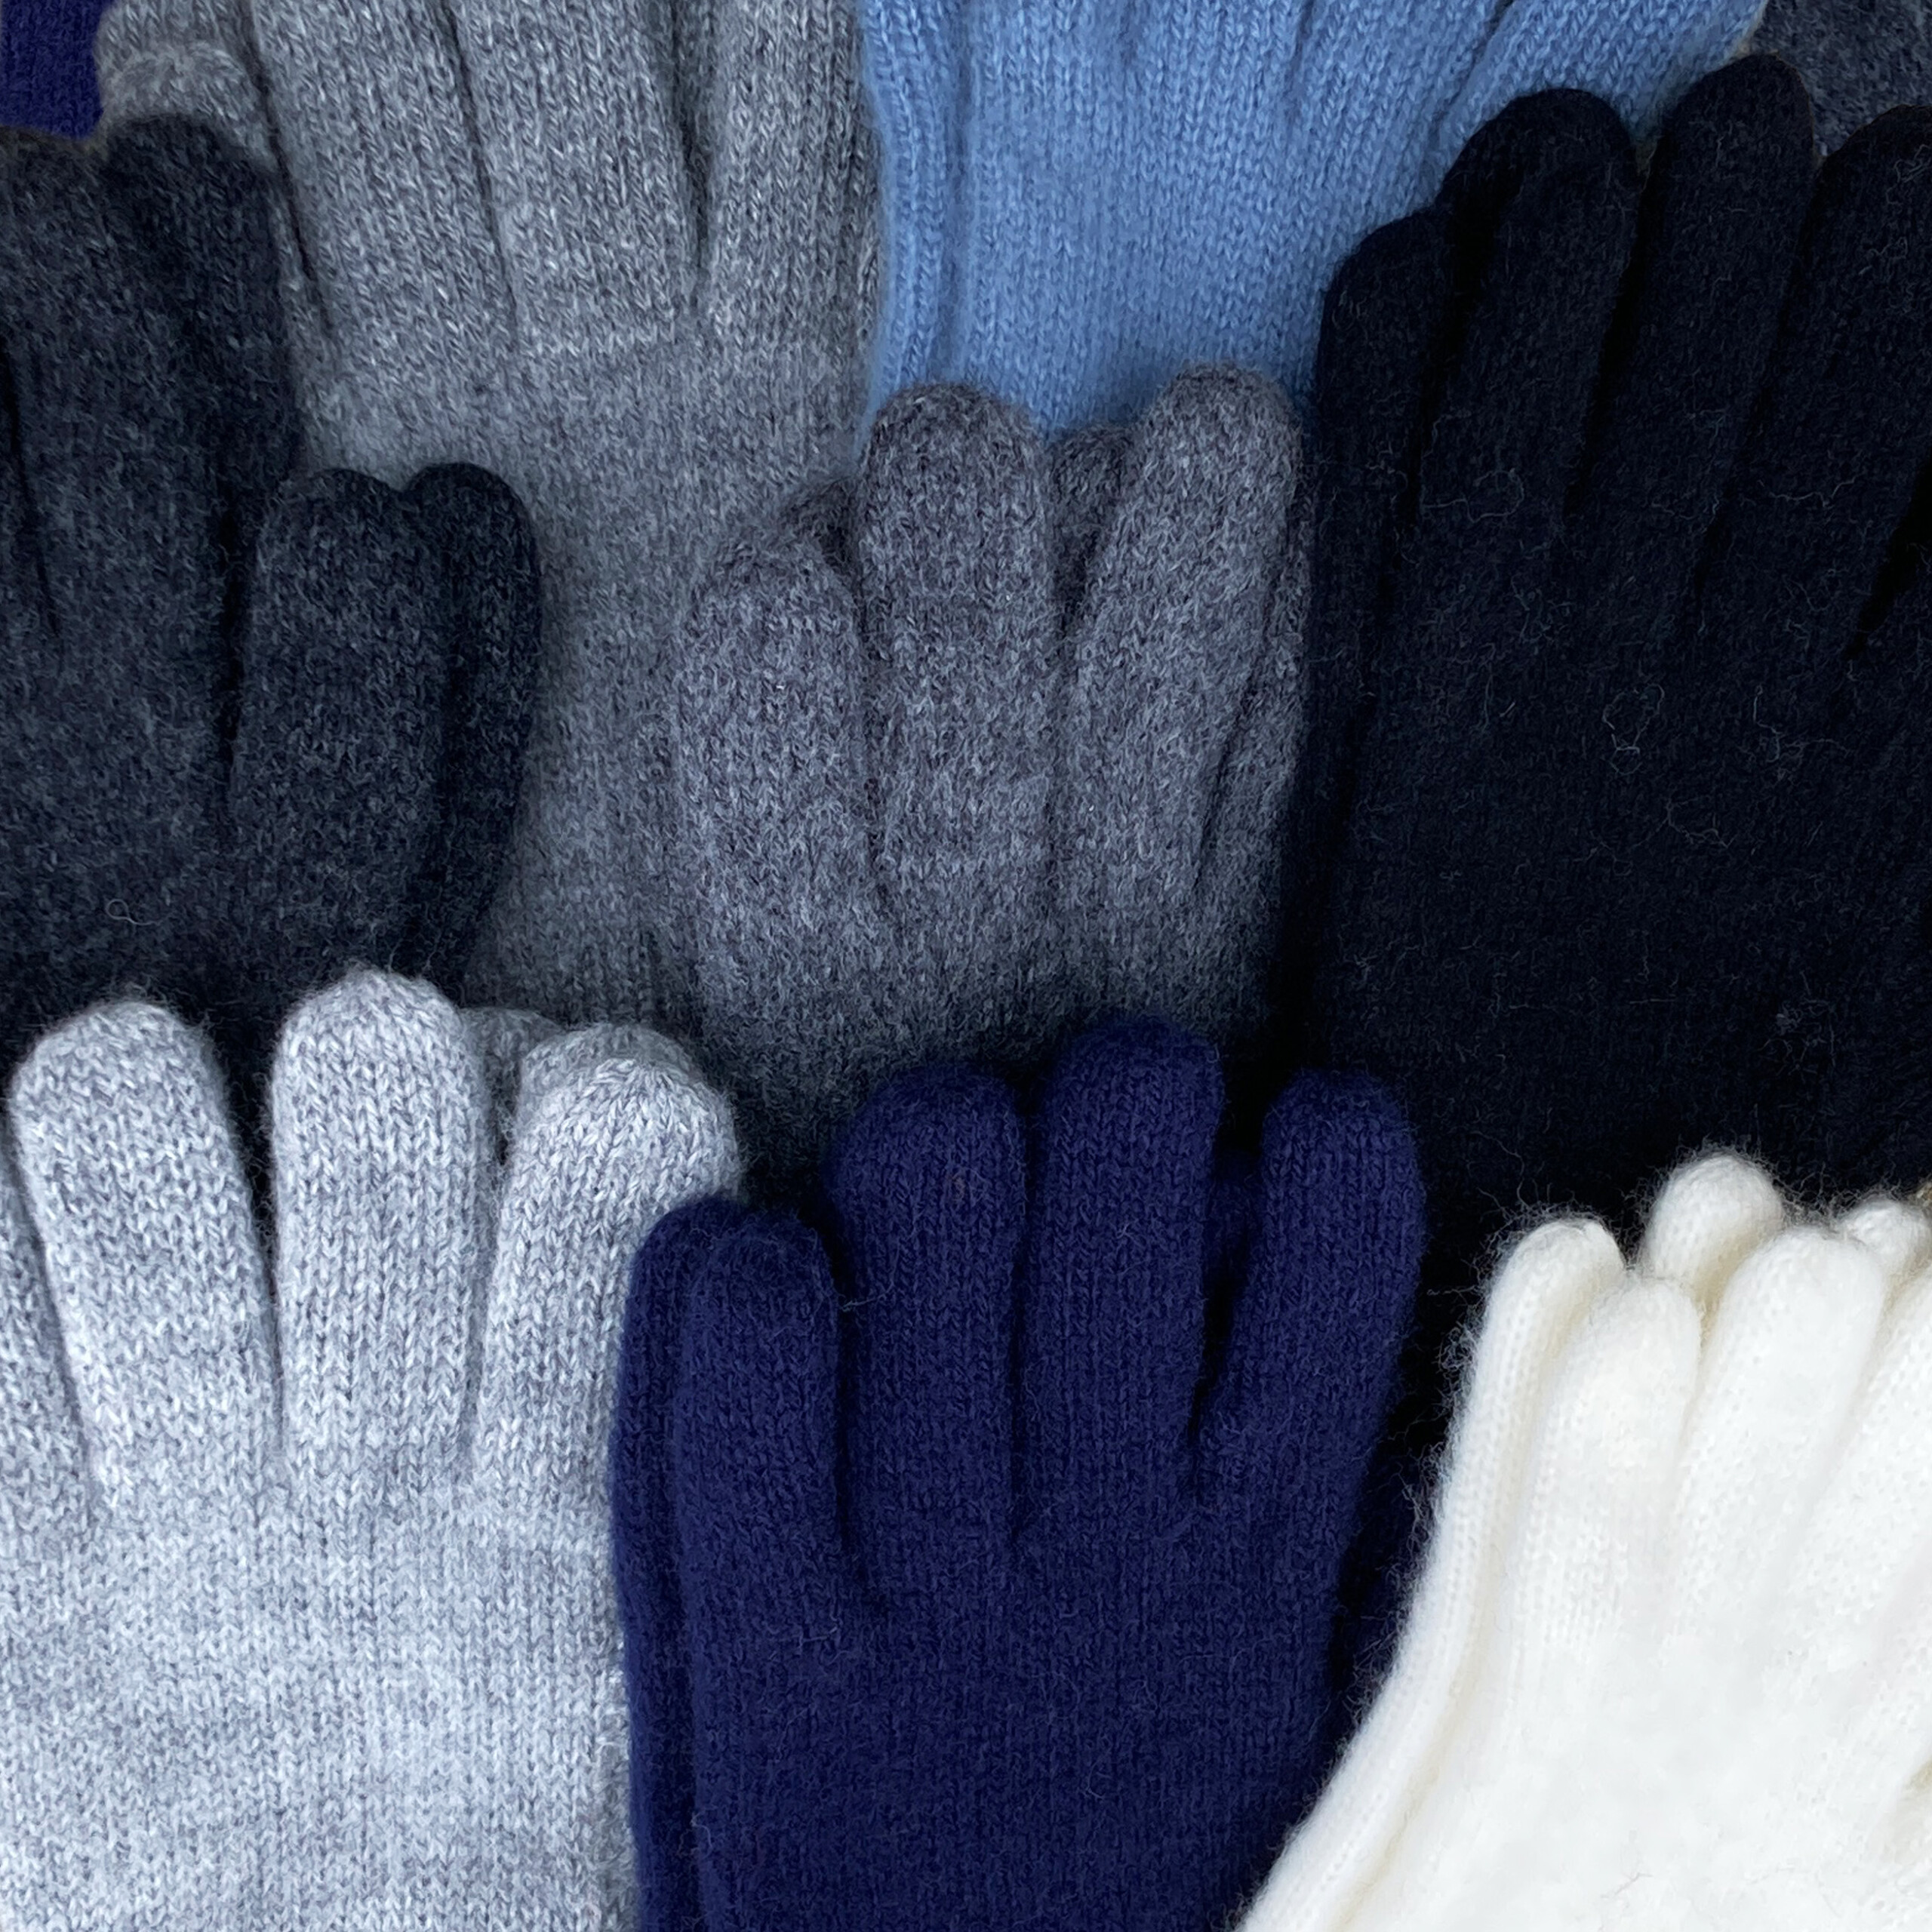 Alpaca Gloves - Alpaca Time - Your One-Stop Shop for Alpaca Products